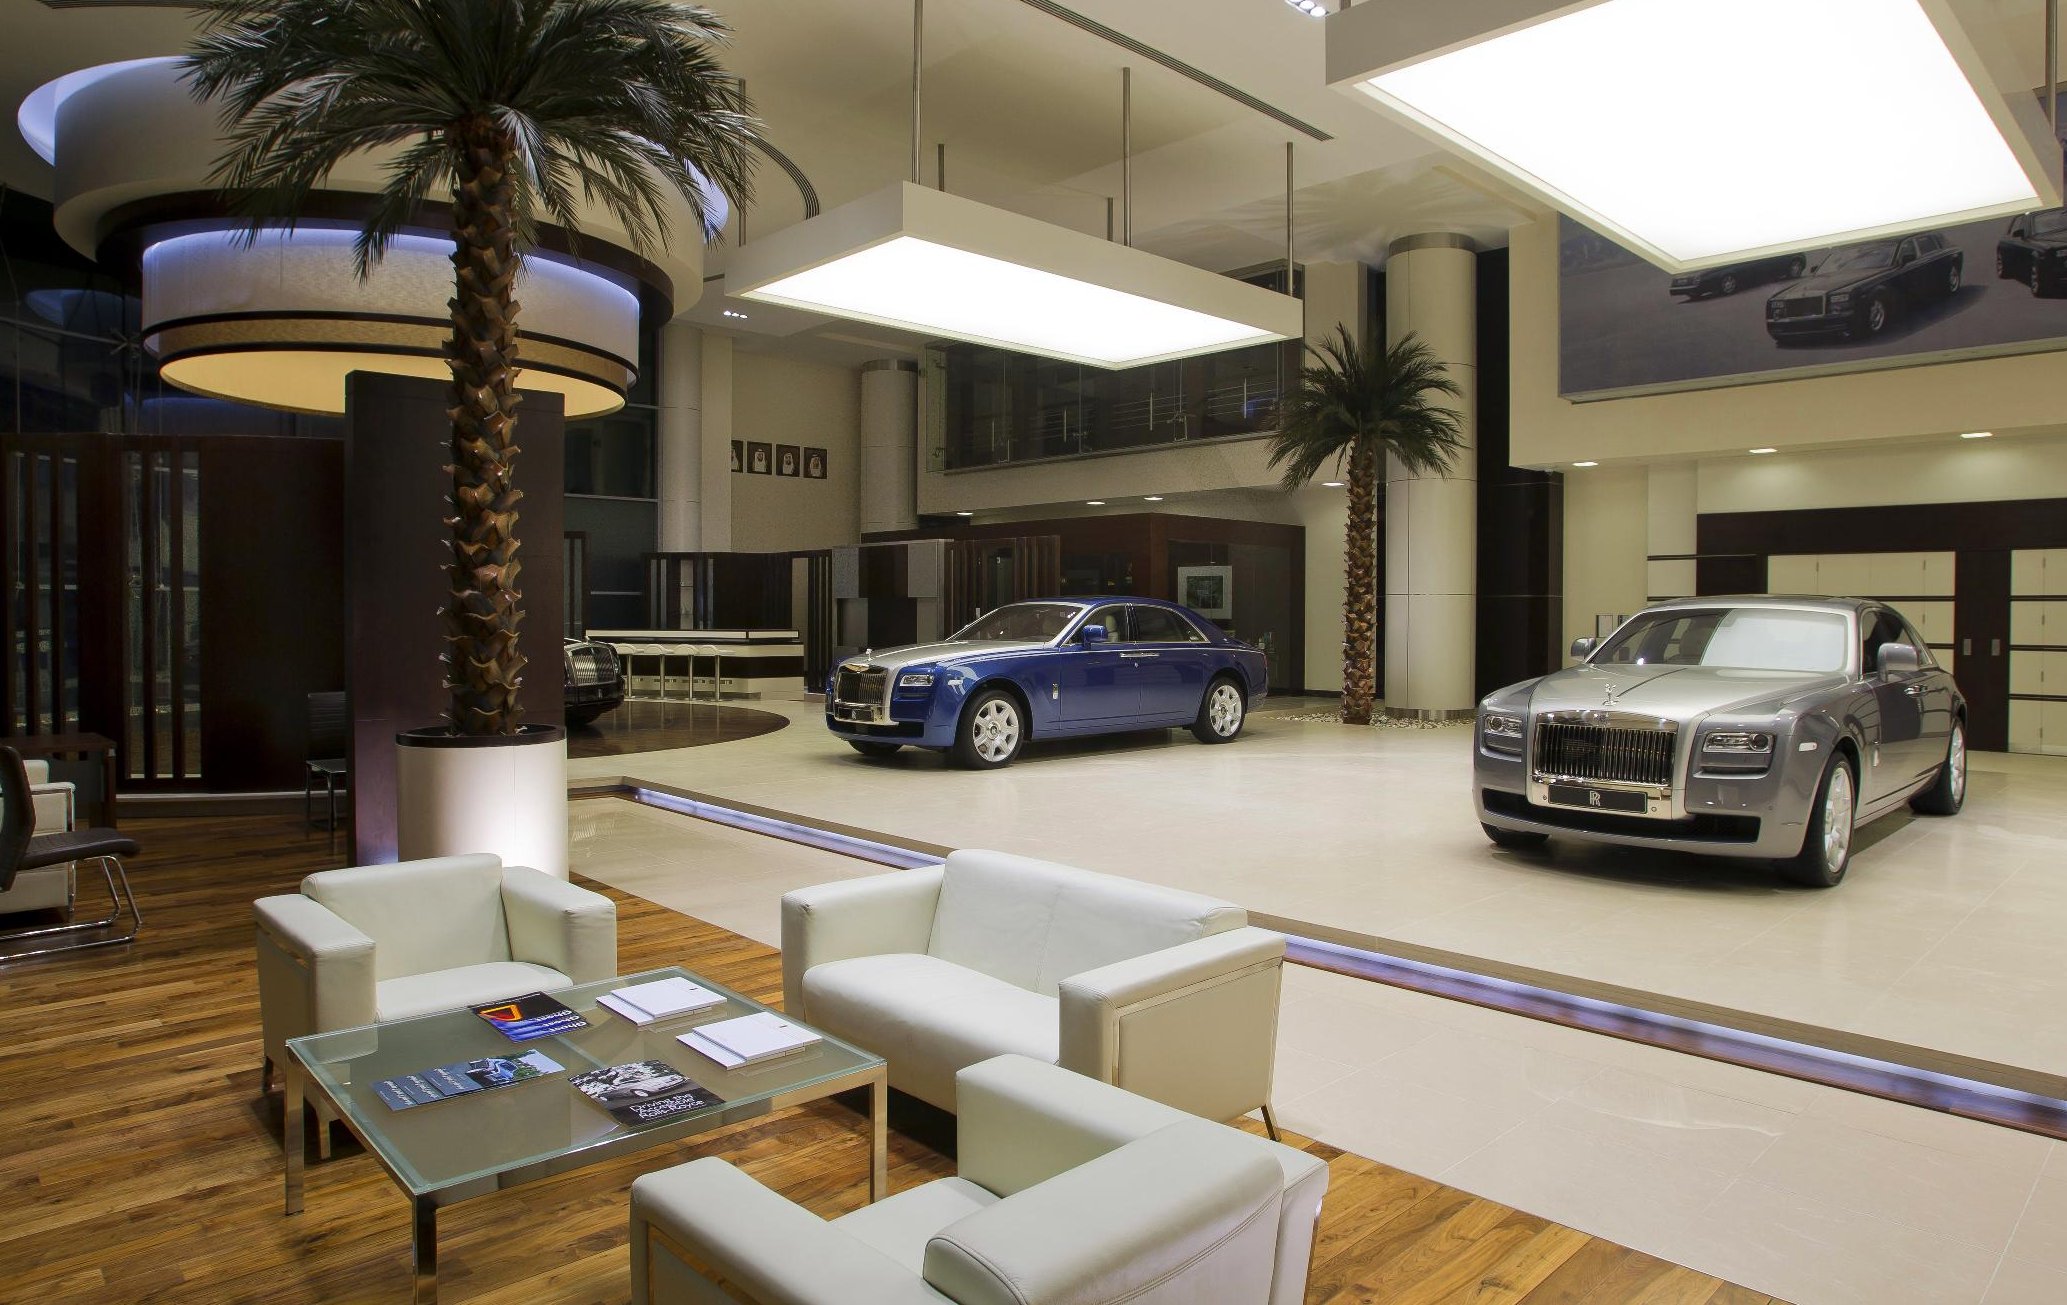 Biggest and Best Worlds Largest RollsRoyce Dealer Opens in Abu Dhabi